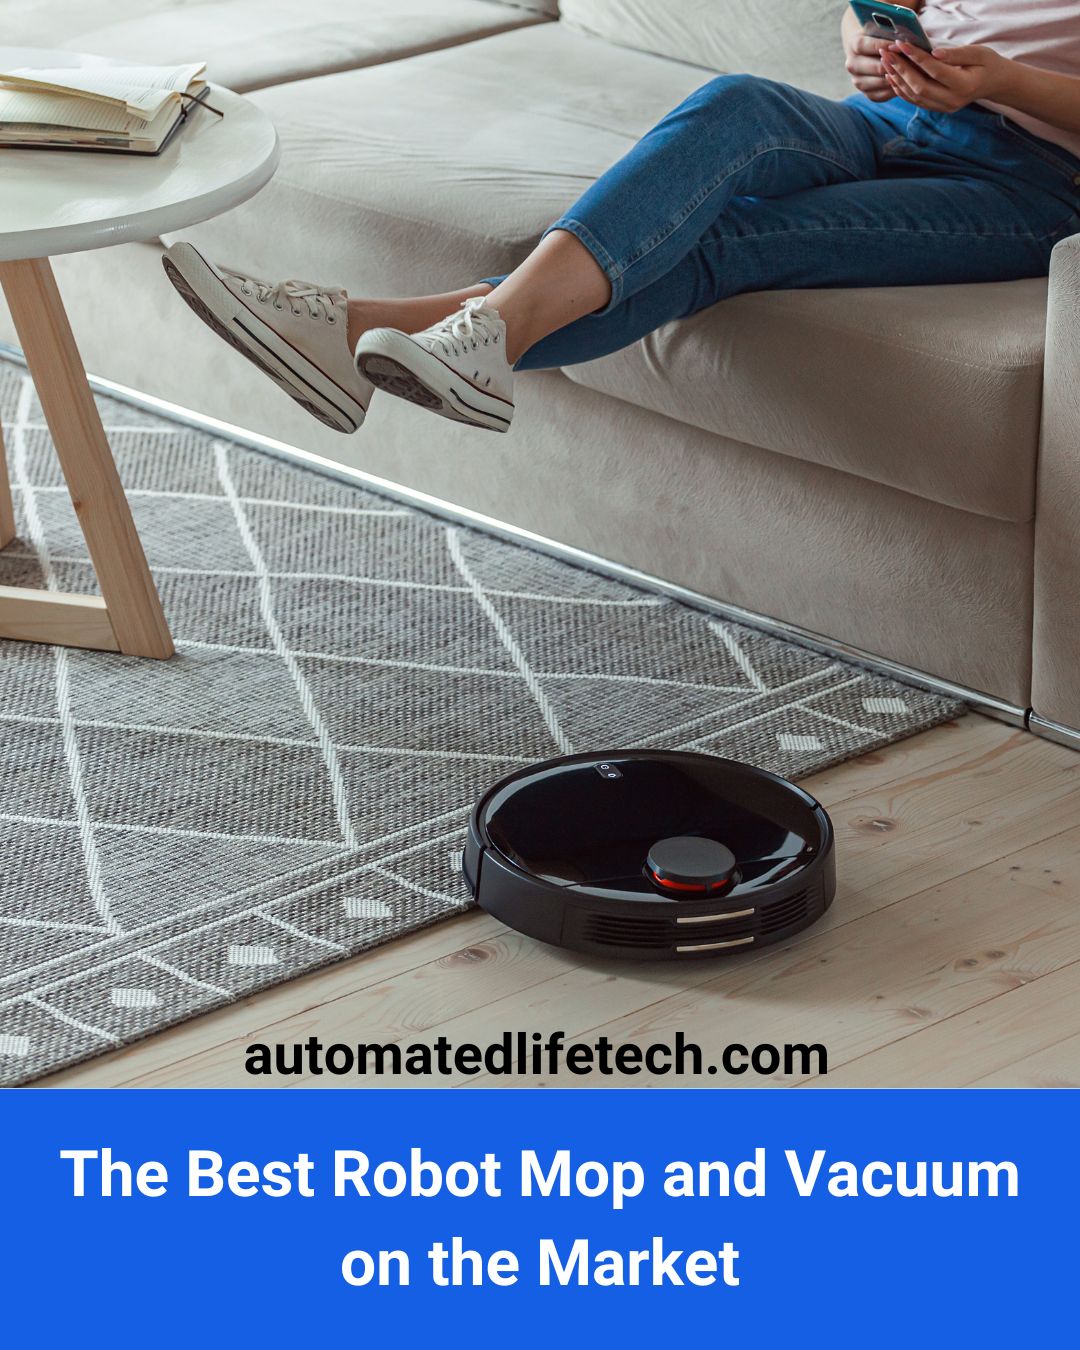 The Best Robot Mop and Vacuum on the Market